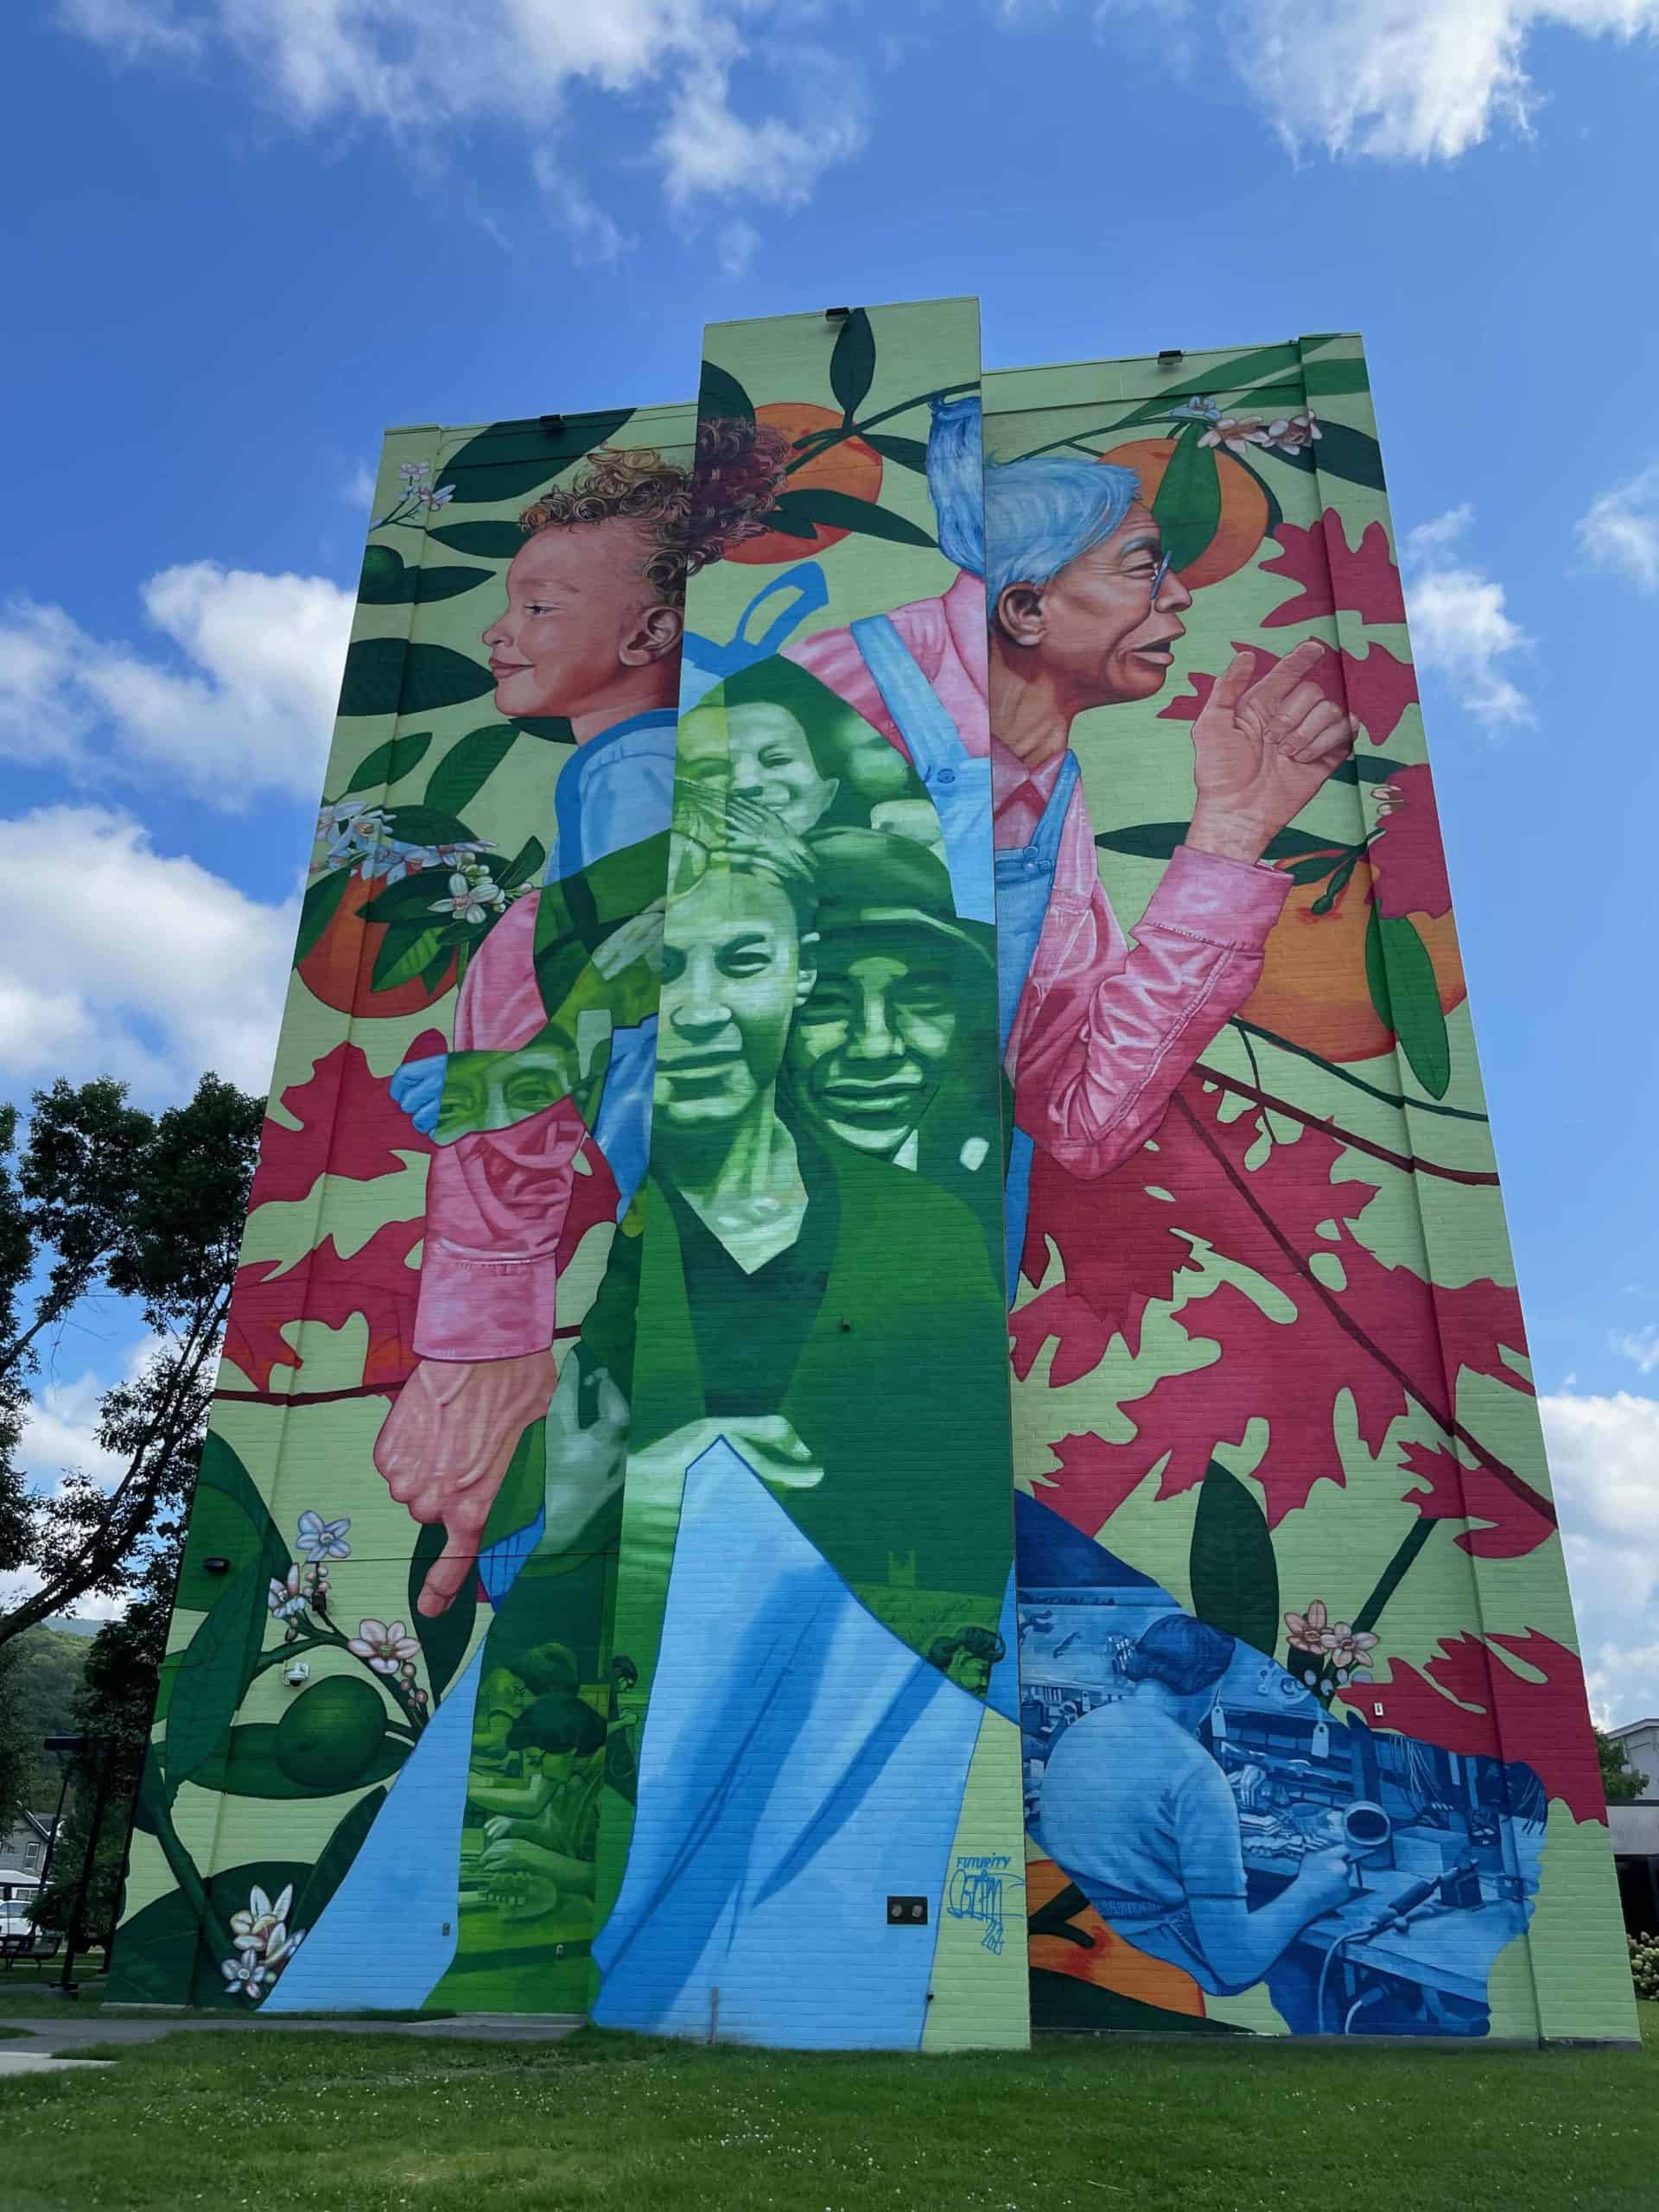 New York artist and muralist Gaia has painted a mural in honor of Lue Gim Gong, horticulturalist and Celestial, who came from China as a young man and worked in the mills in North Adams before moving to Florida.